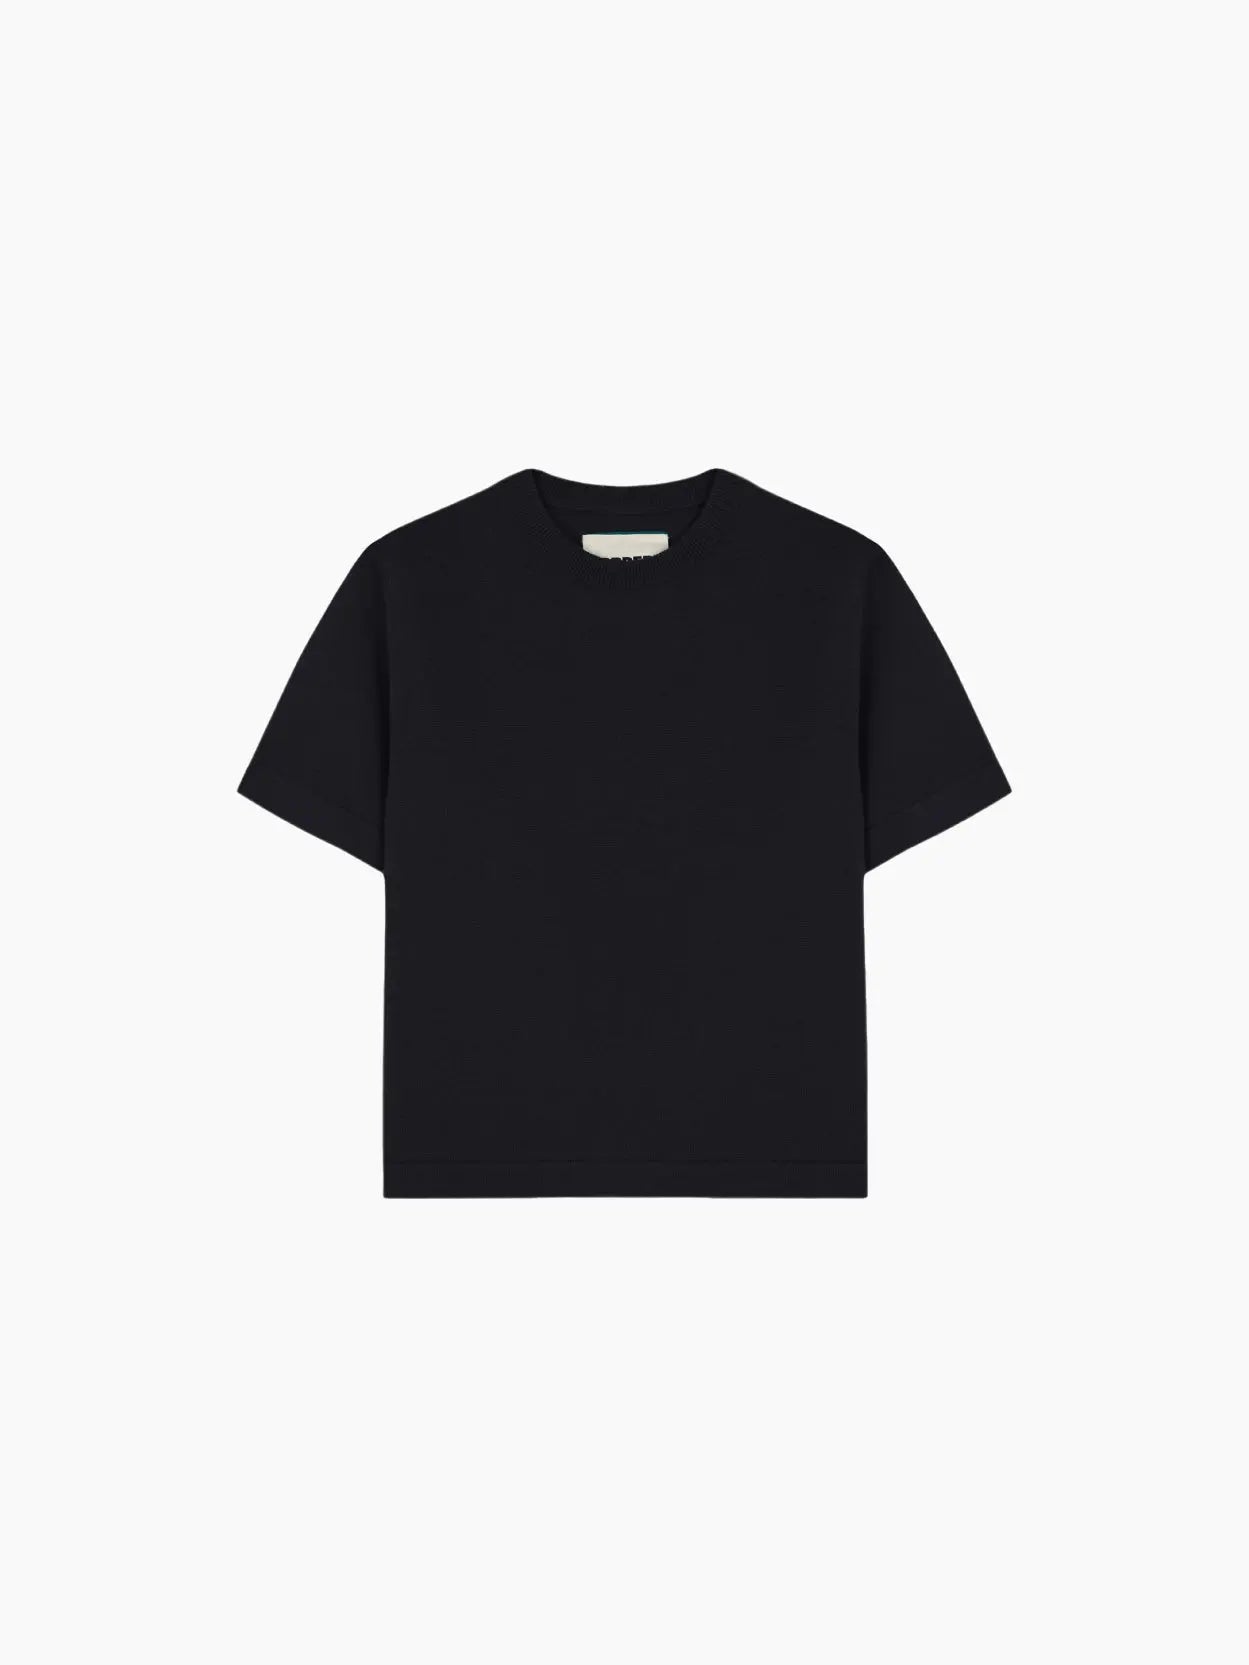 A plain, short-sleeved, black Merino Wool T-Shirt is displayed against a white background. The T-shirt features a simple crew neck design and is free of any logos, patterns, or graphics. This minimalist staple by Cordera can be found at BassalStore in Barcelona.